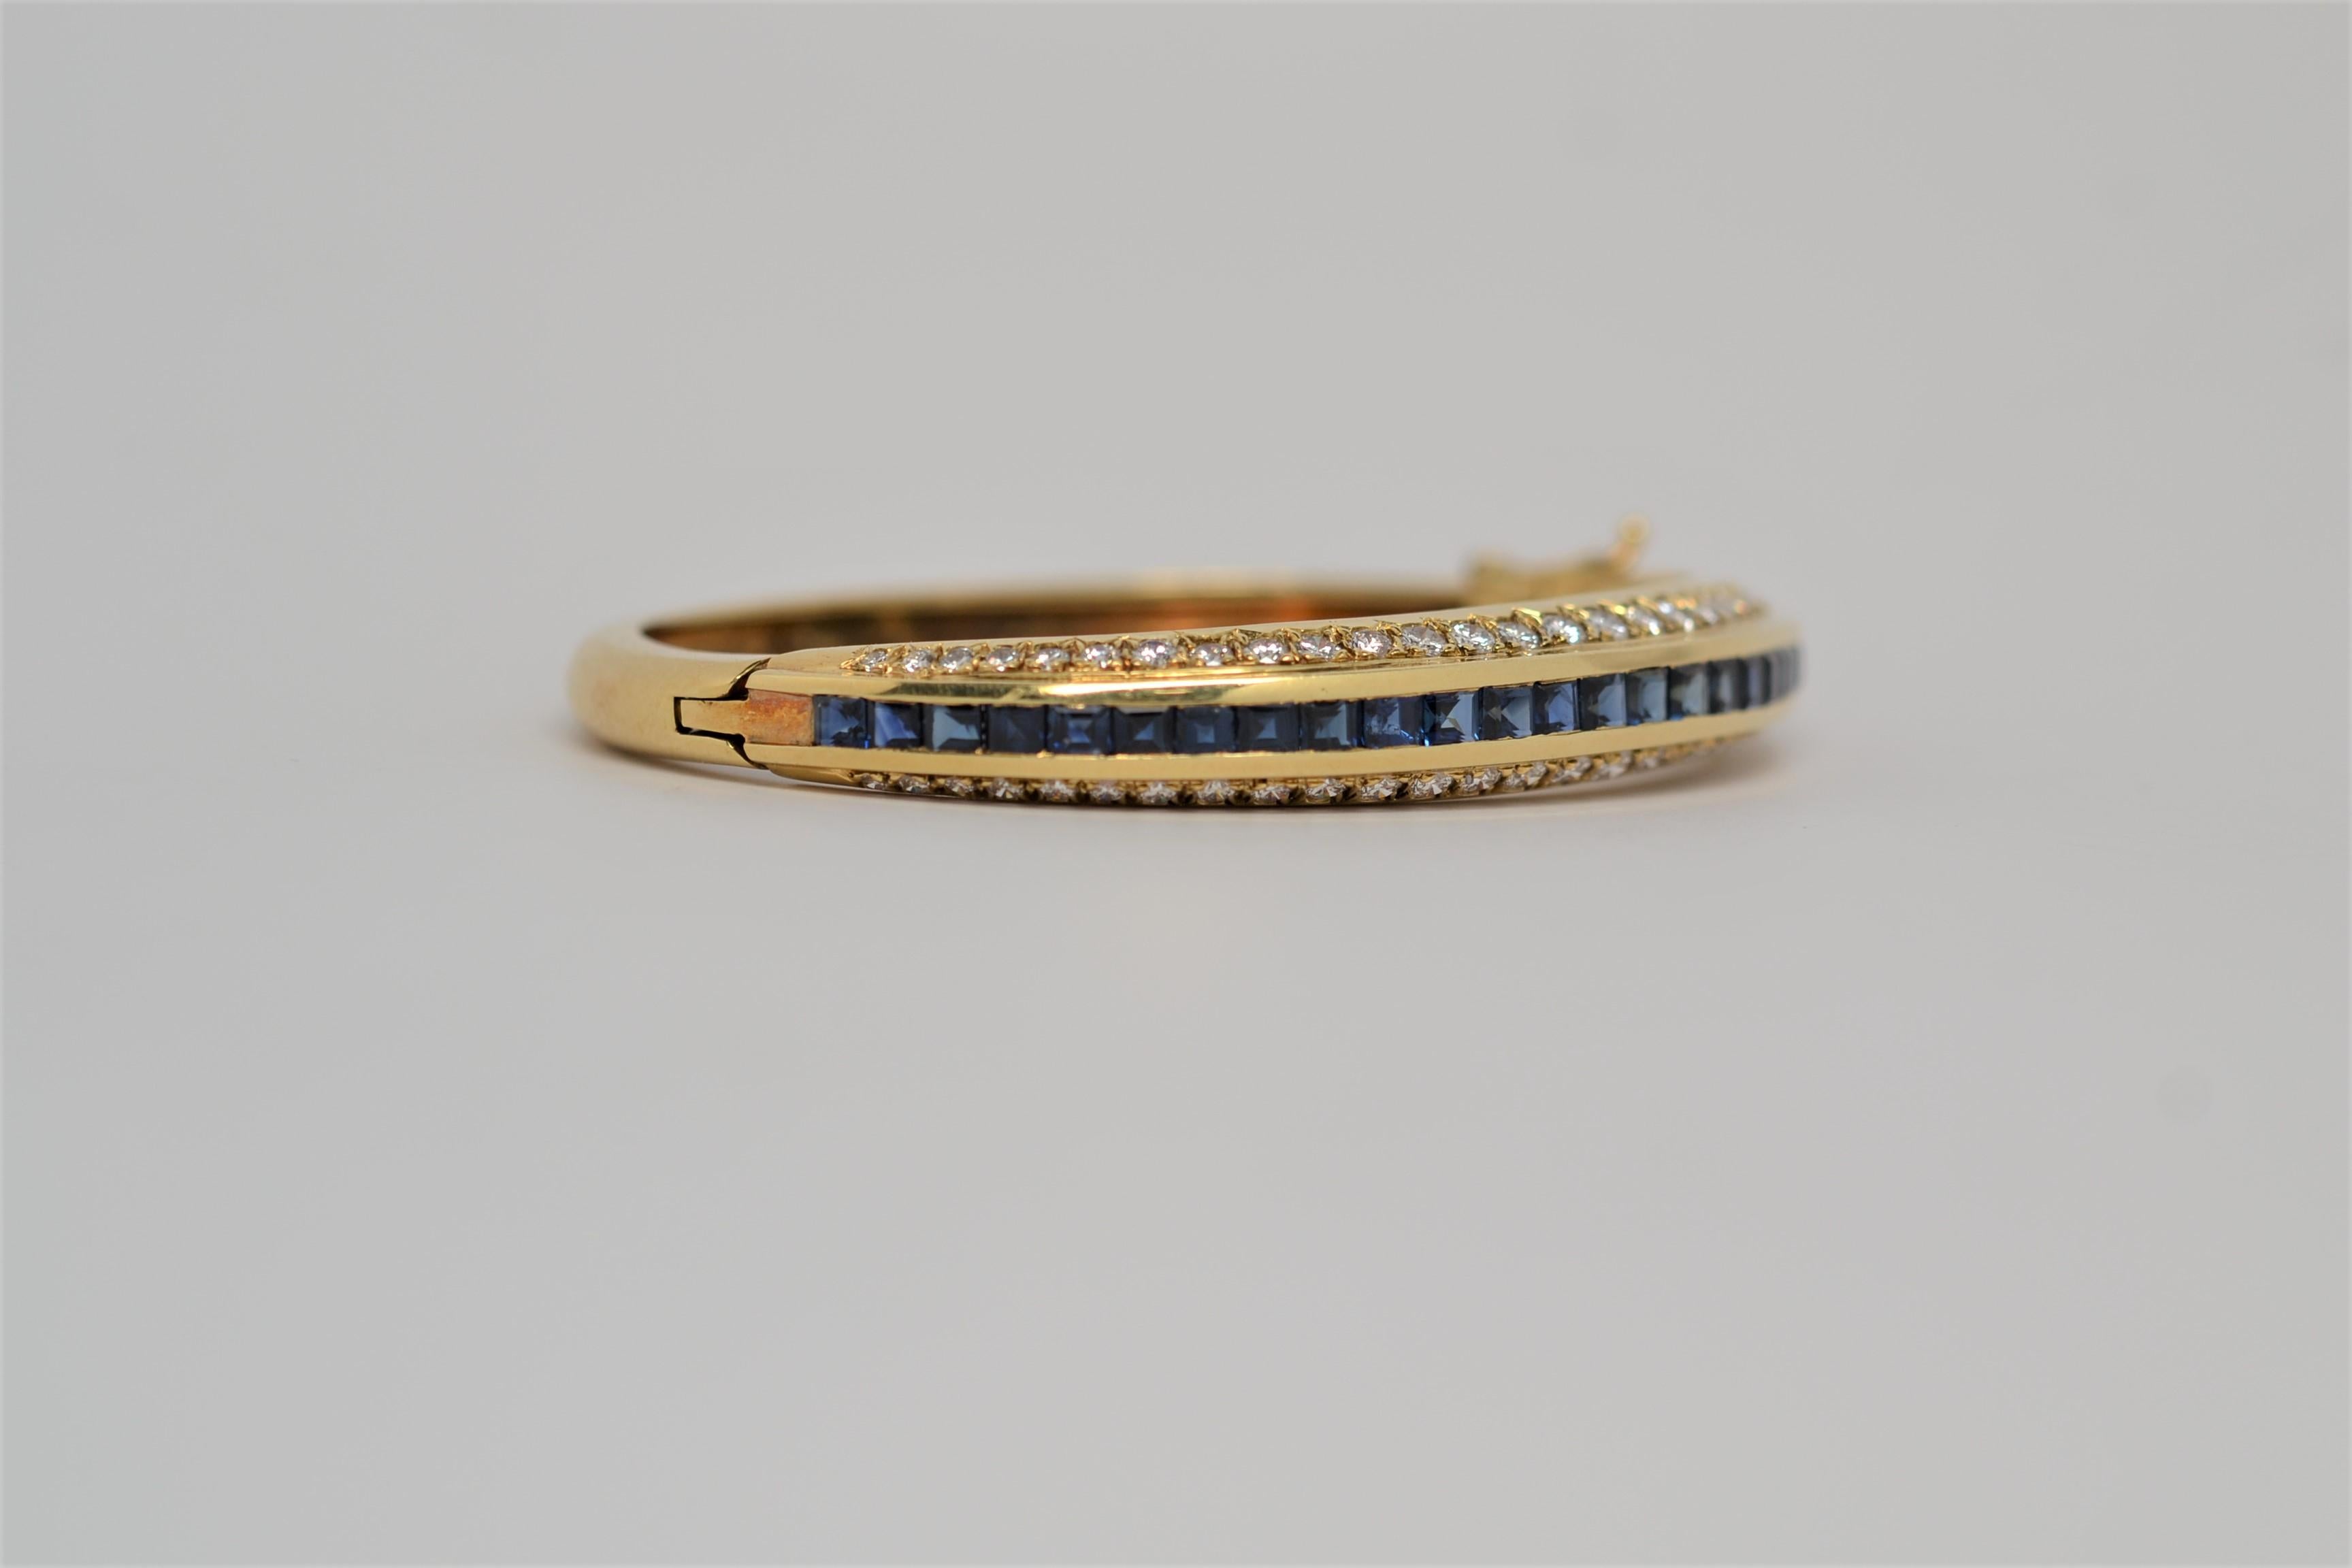 One 18K Yellow Gold bangle bracelet set with Square Cut Blue Sapphires and Round Brilliant Cut Diamonds. The hinged bangle bracelet utilizes a traditional clasp and secondary lock. It is a three row layout set halfway around with Blue Sapphires in